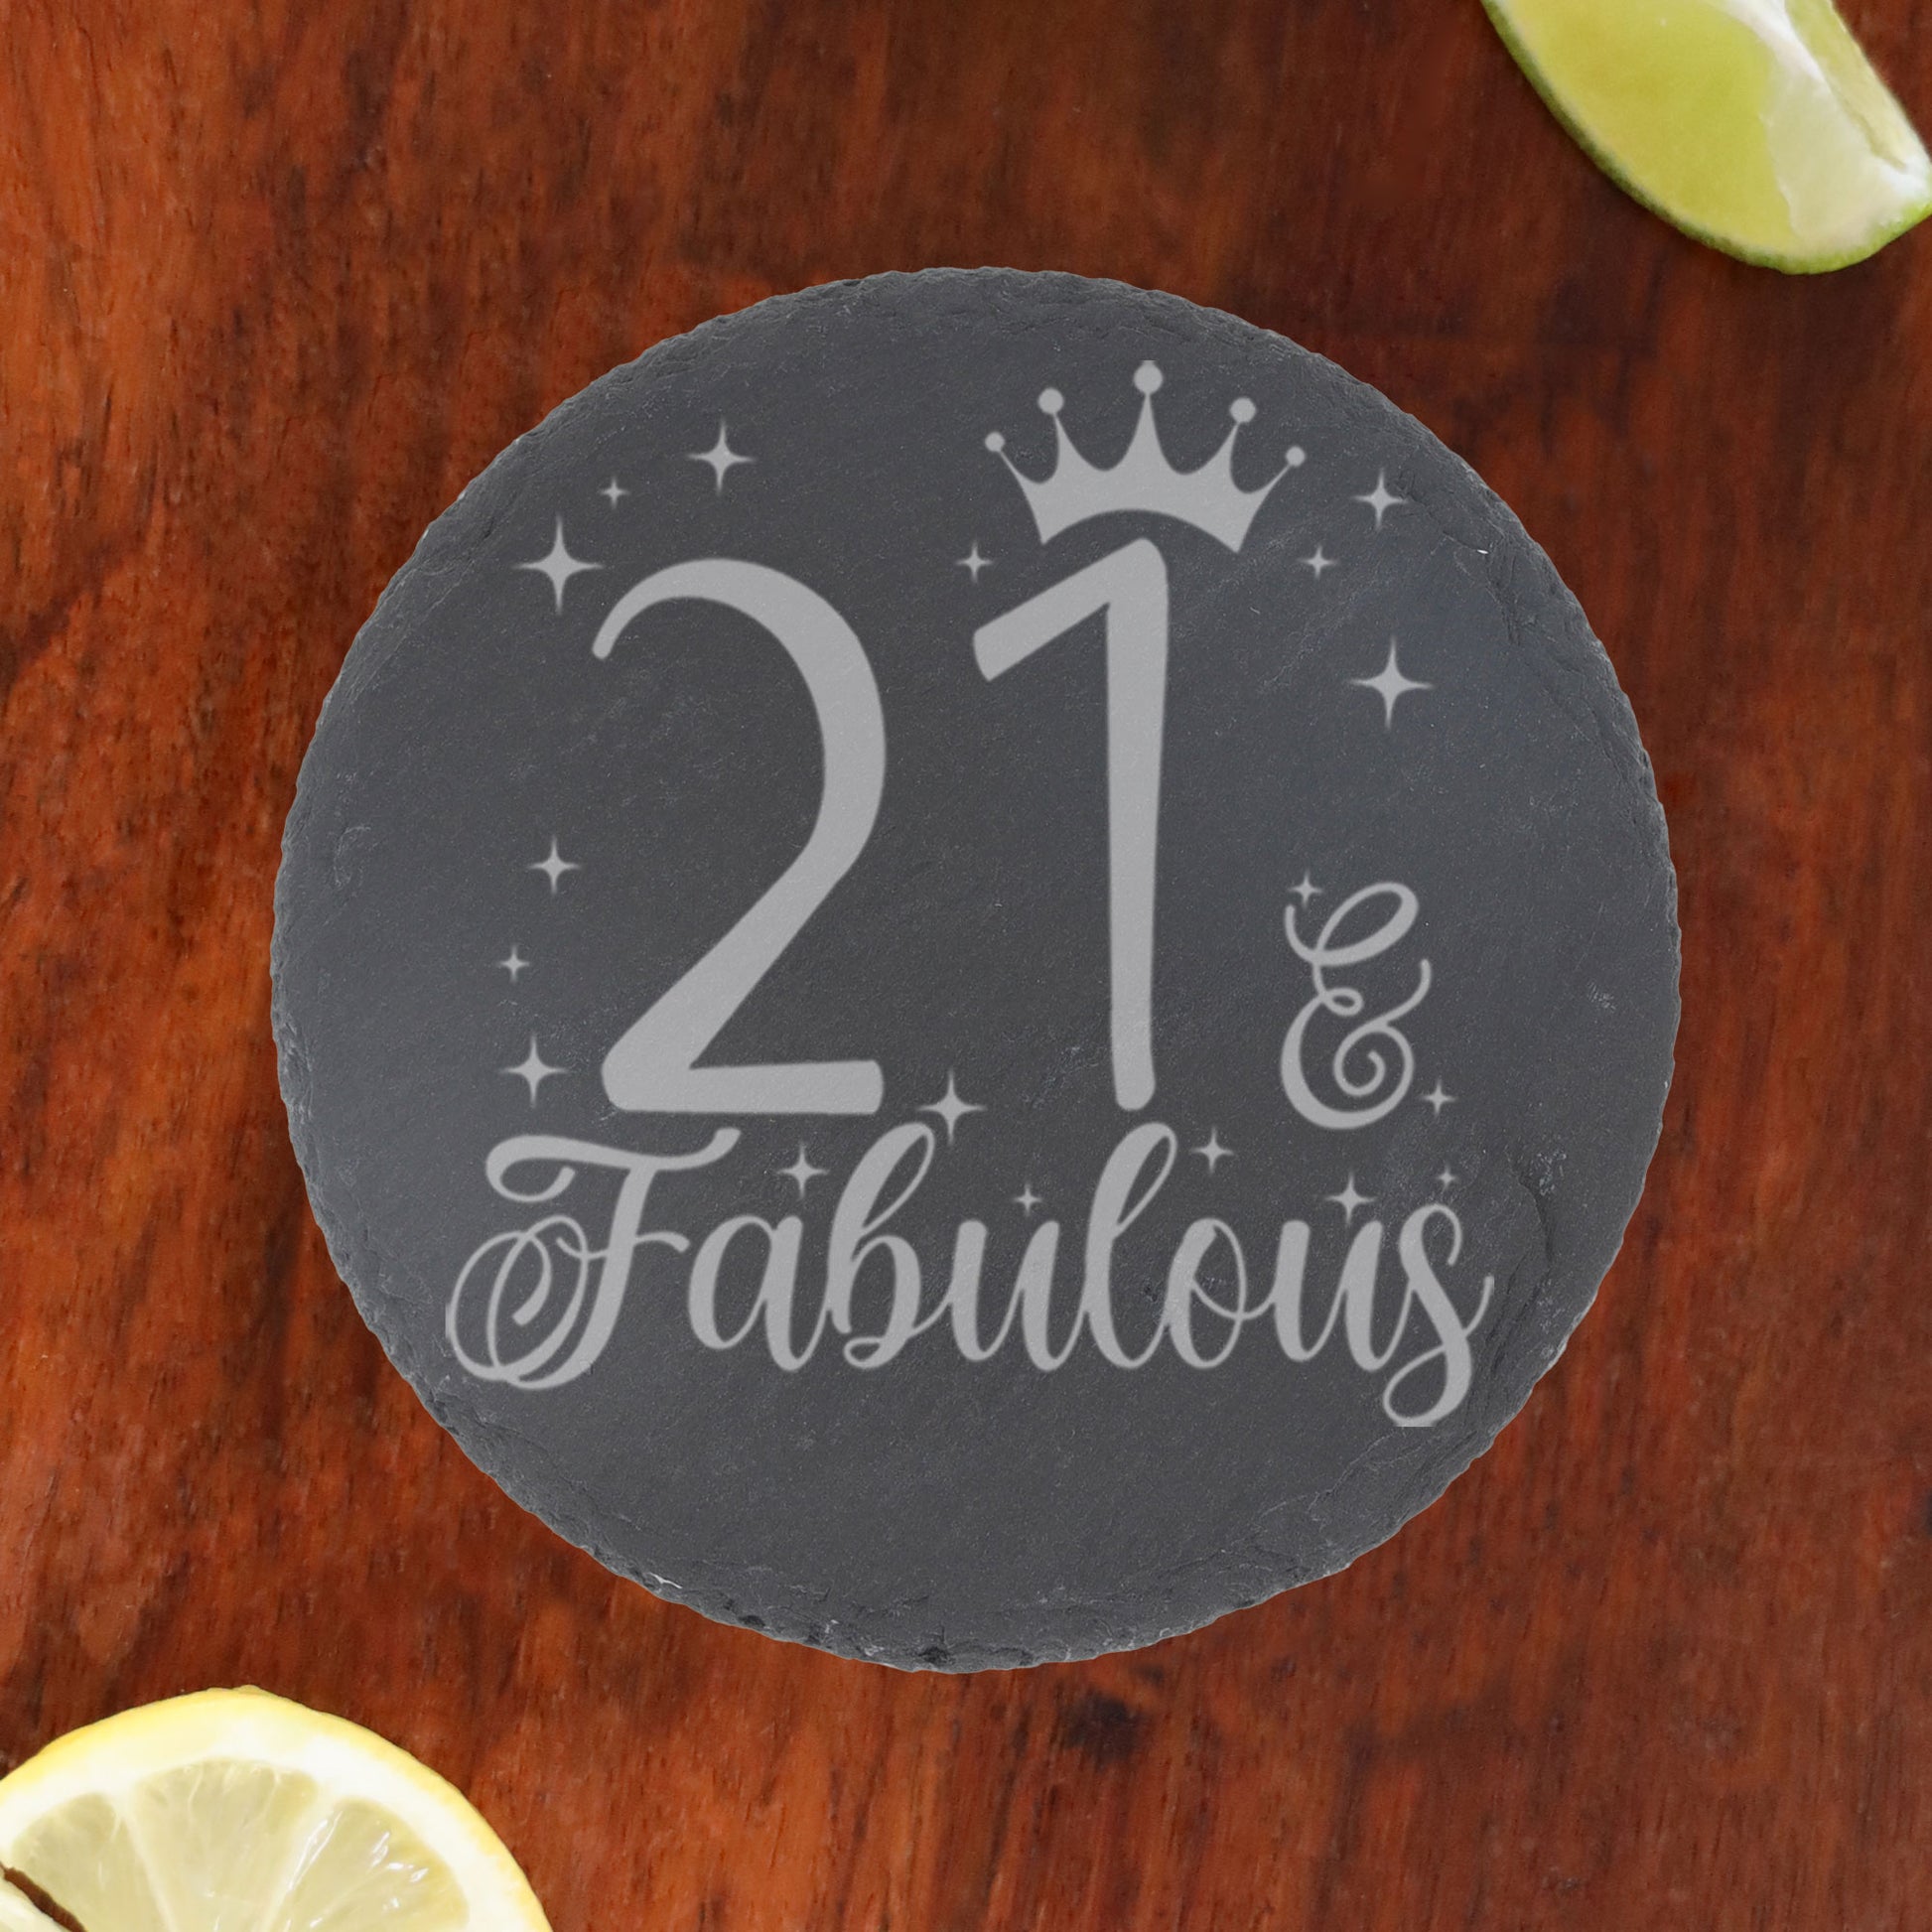 21 & Fabulous 21st Birthday Gift Engraved Wine Glass and/or Coaster Set  - Always Looking Good - Round Coaster Only  